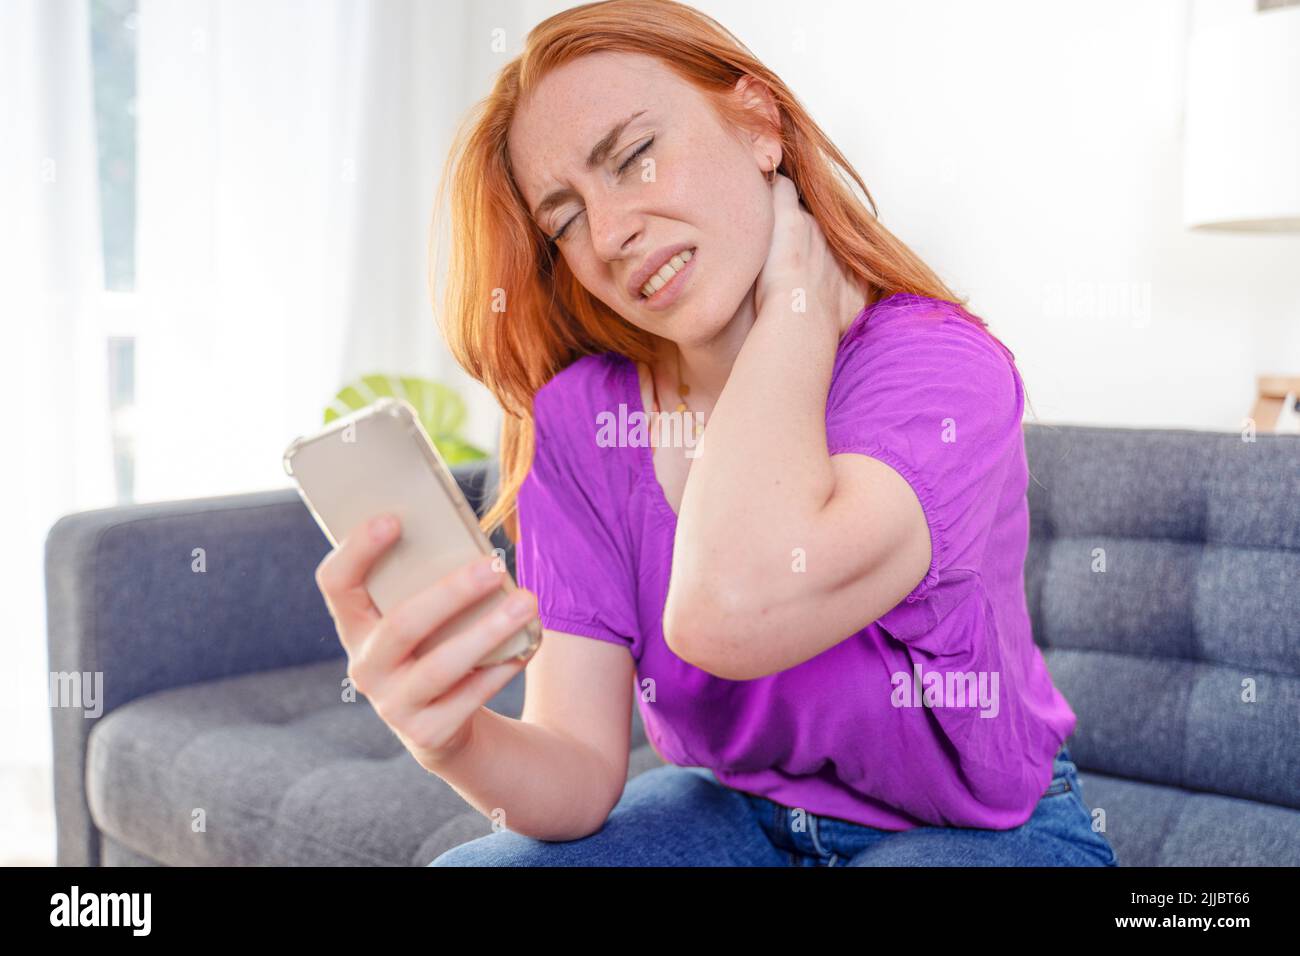 Woman suffering pain in head and neck watching mobile phone Stock Photo